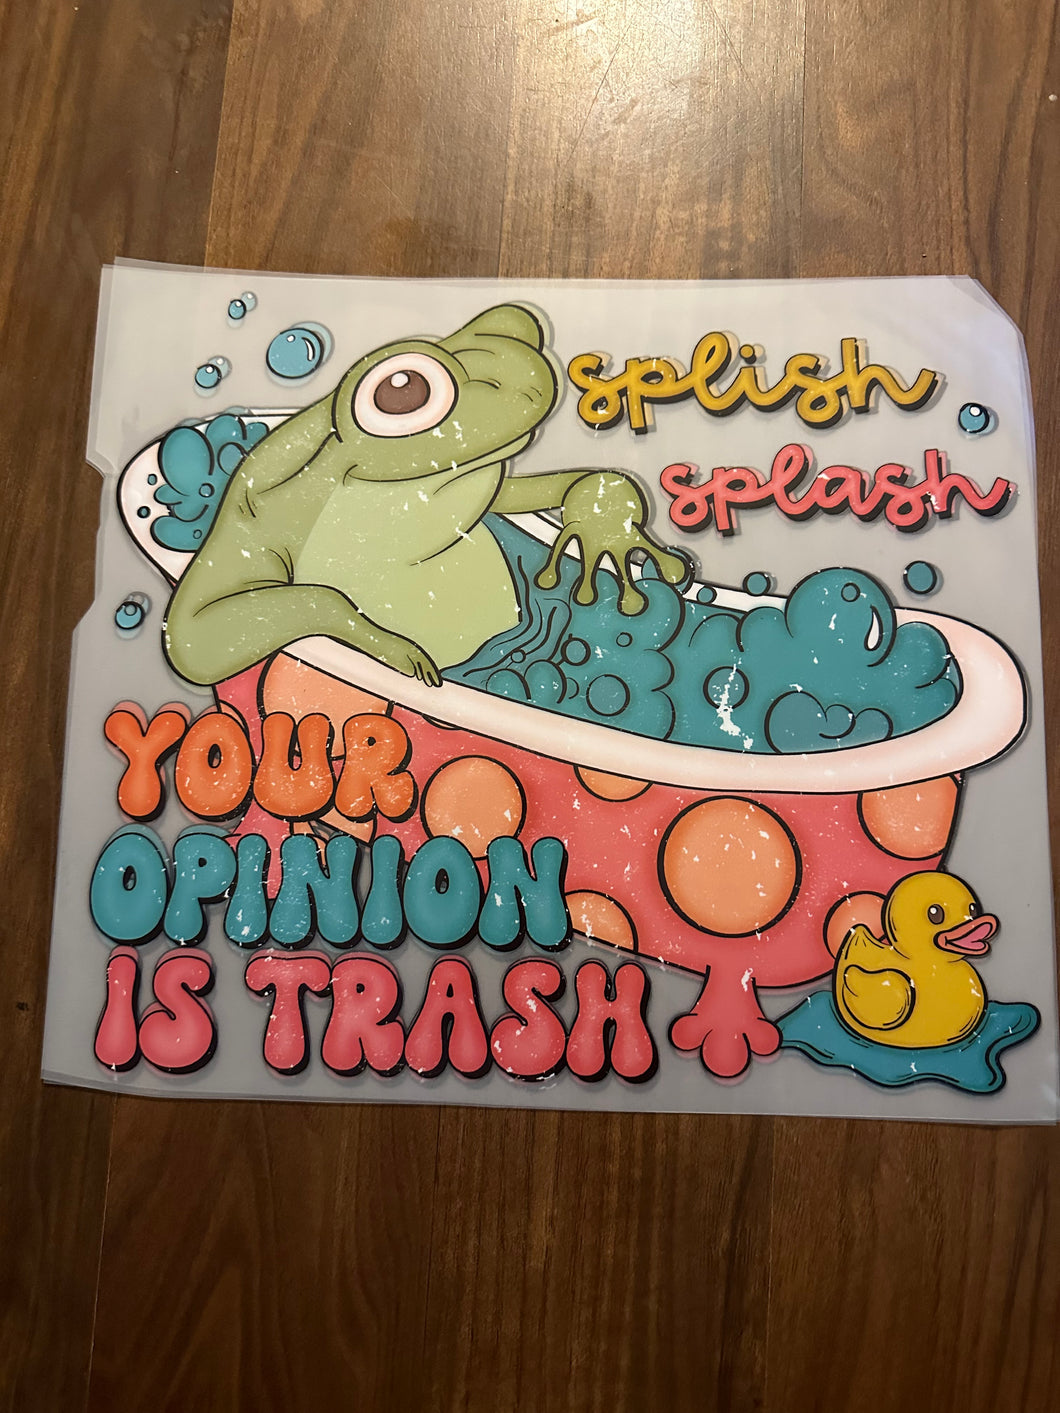 Opinion is trash